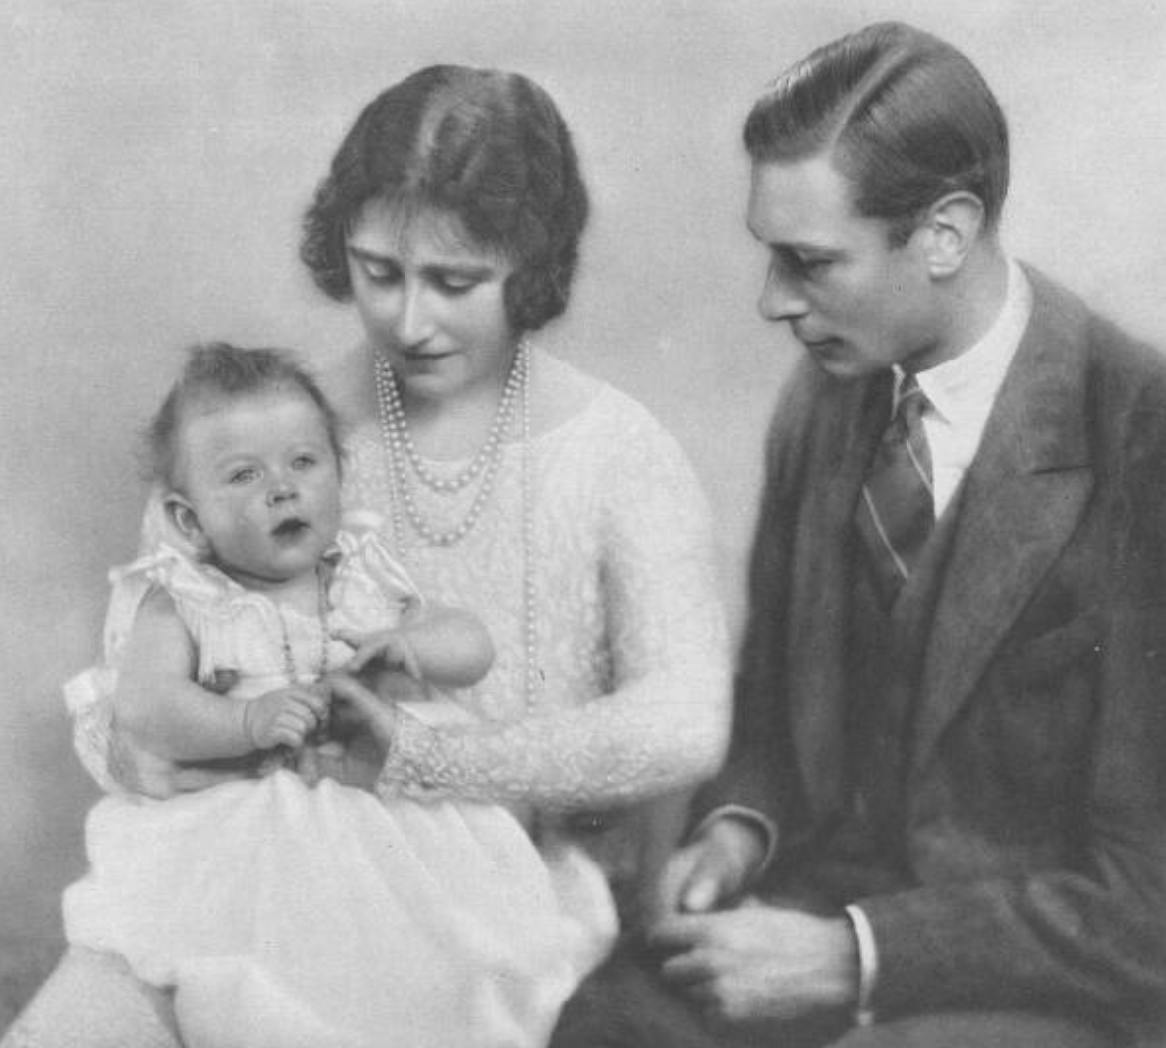 Princess Elizabeth with her parents, the Duke and Duchess of York, pictured in The Sketch, 22 December 1926.